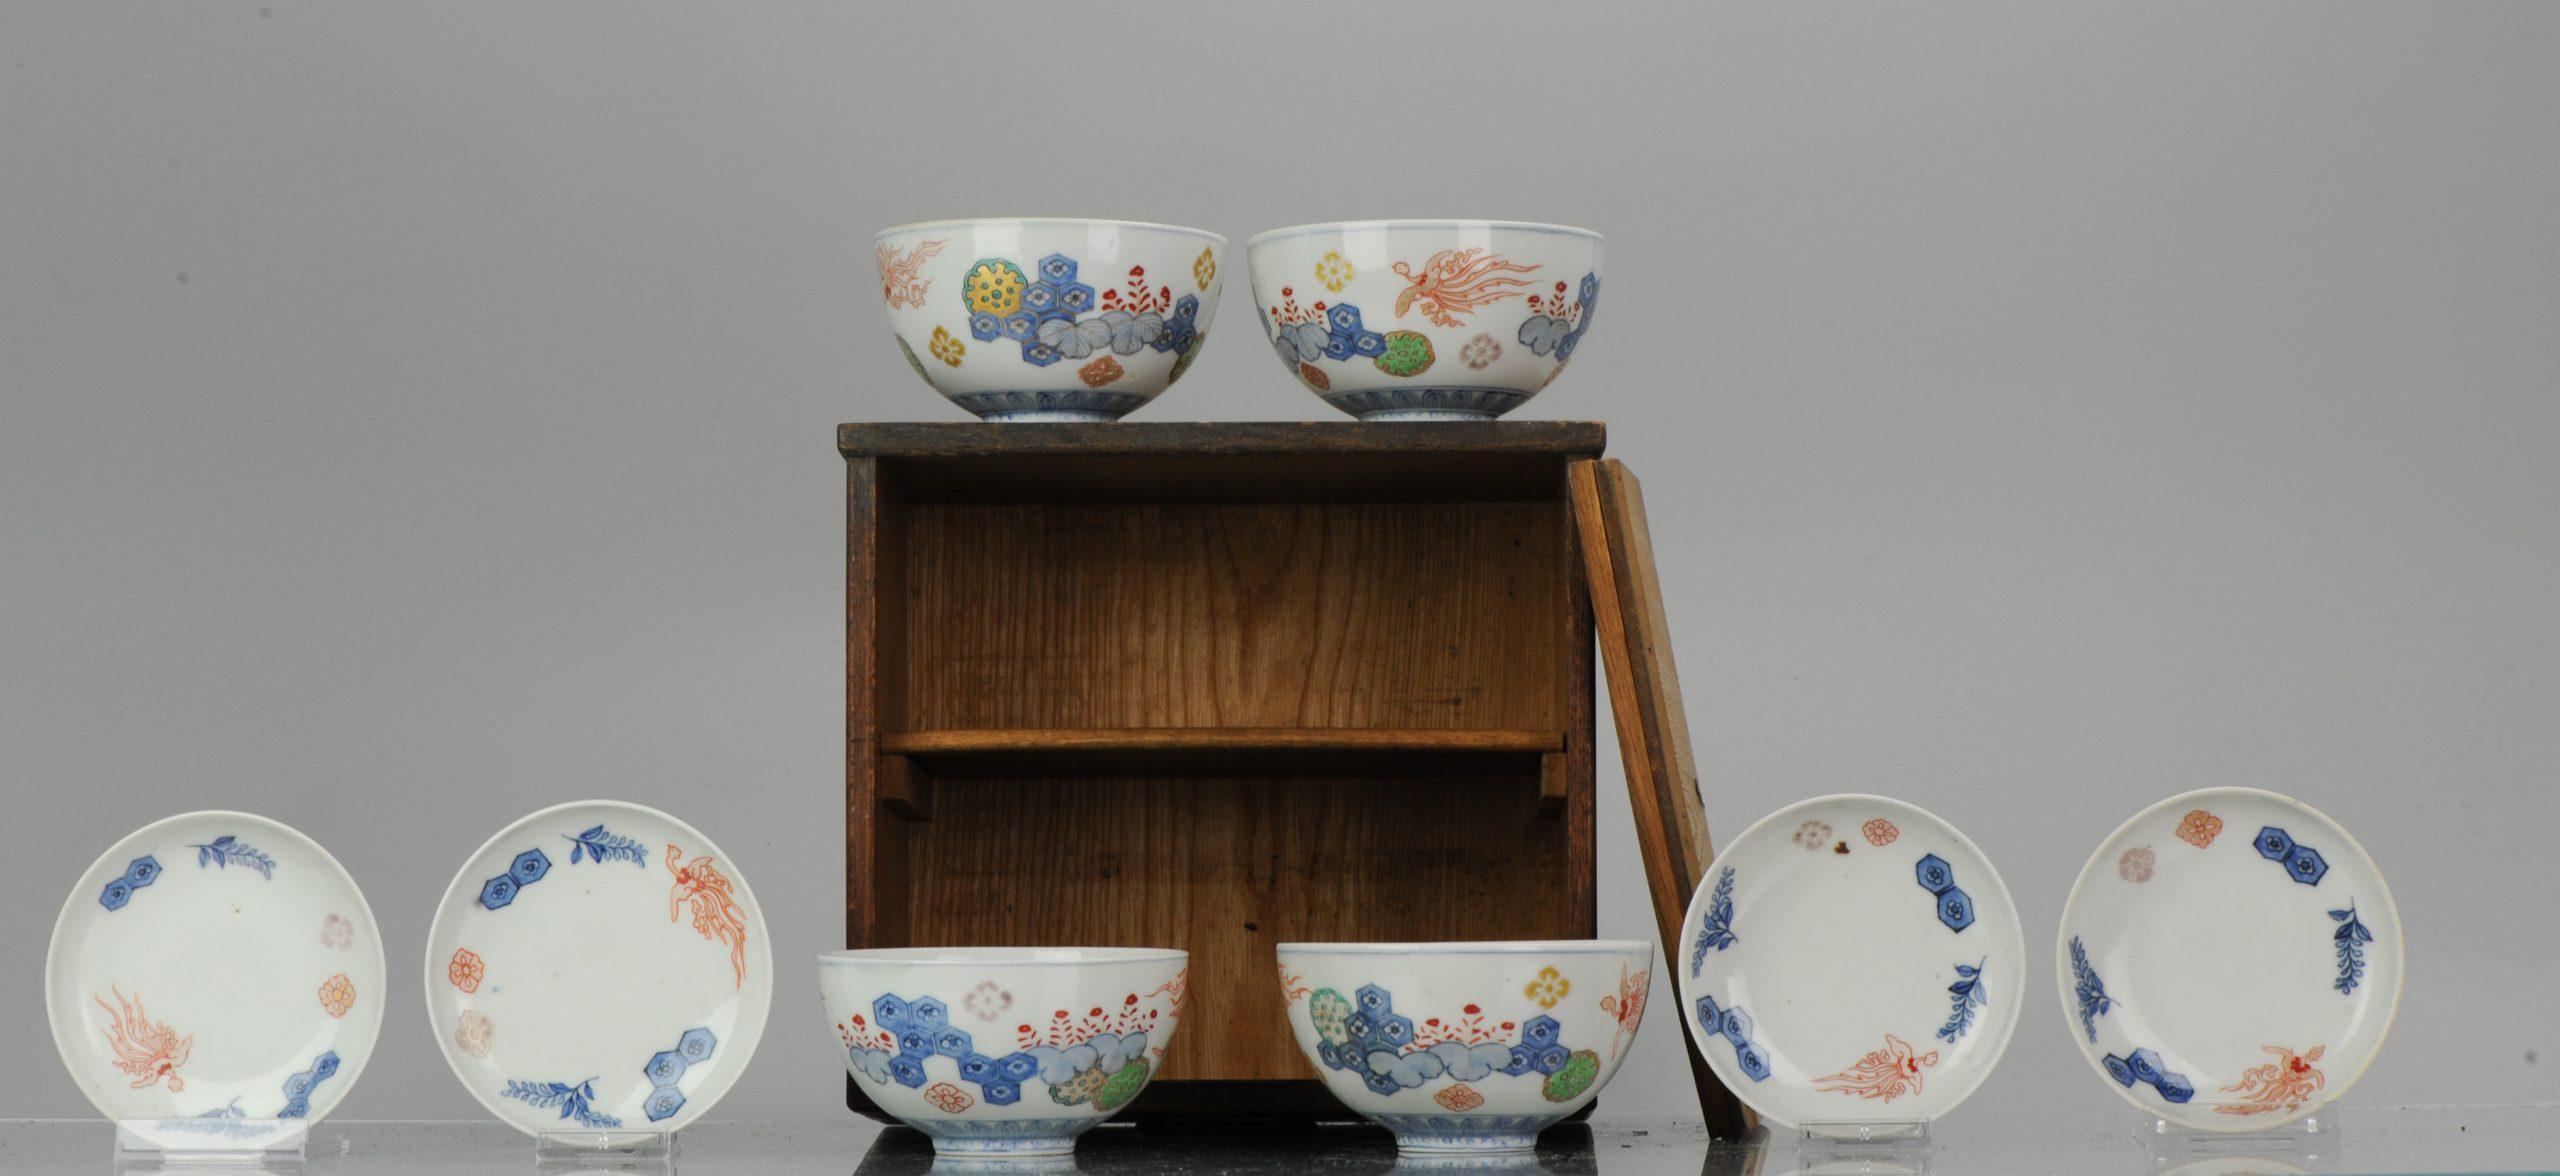 A very nicely decorated set of tea gaiwan bowls

Condition:
All damages pictured, nothing serious. Size: 117 x 73mm
Period:
18th century
19th century.